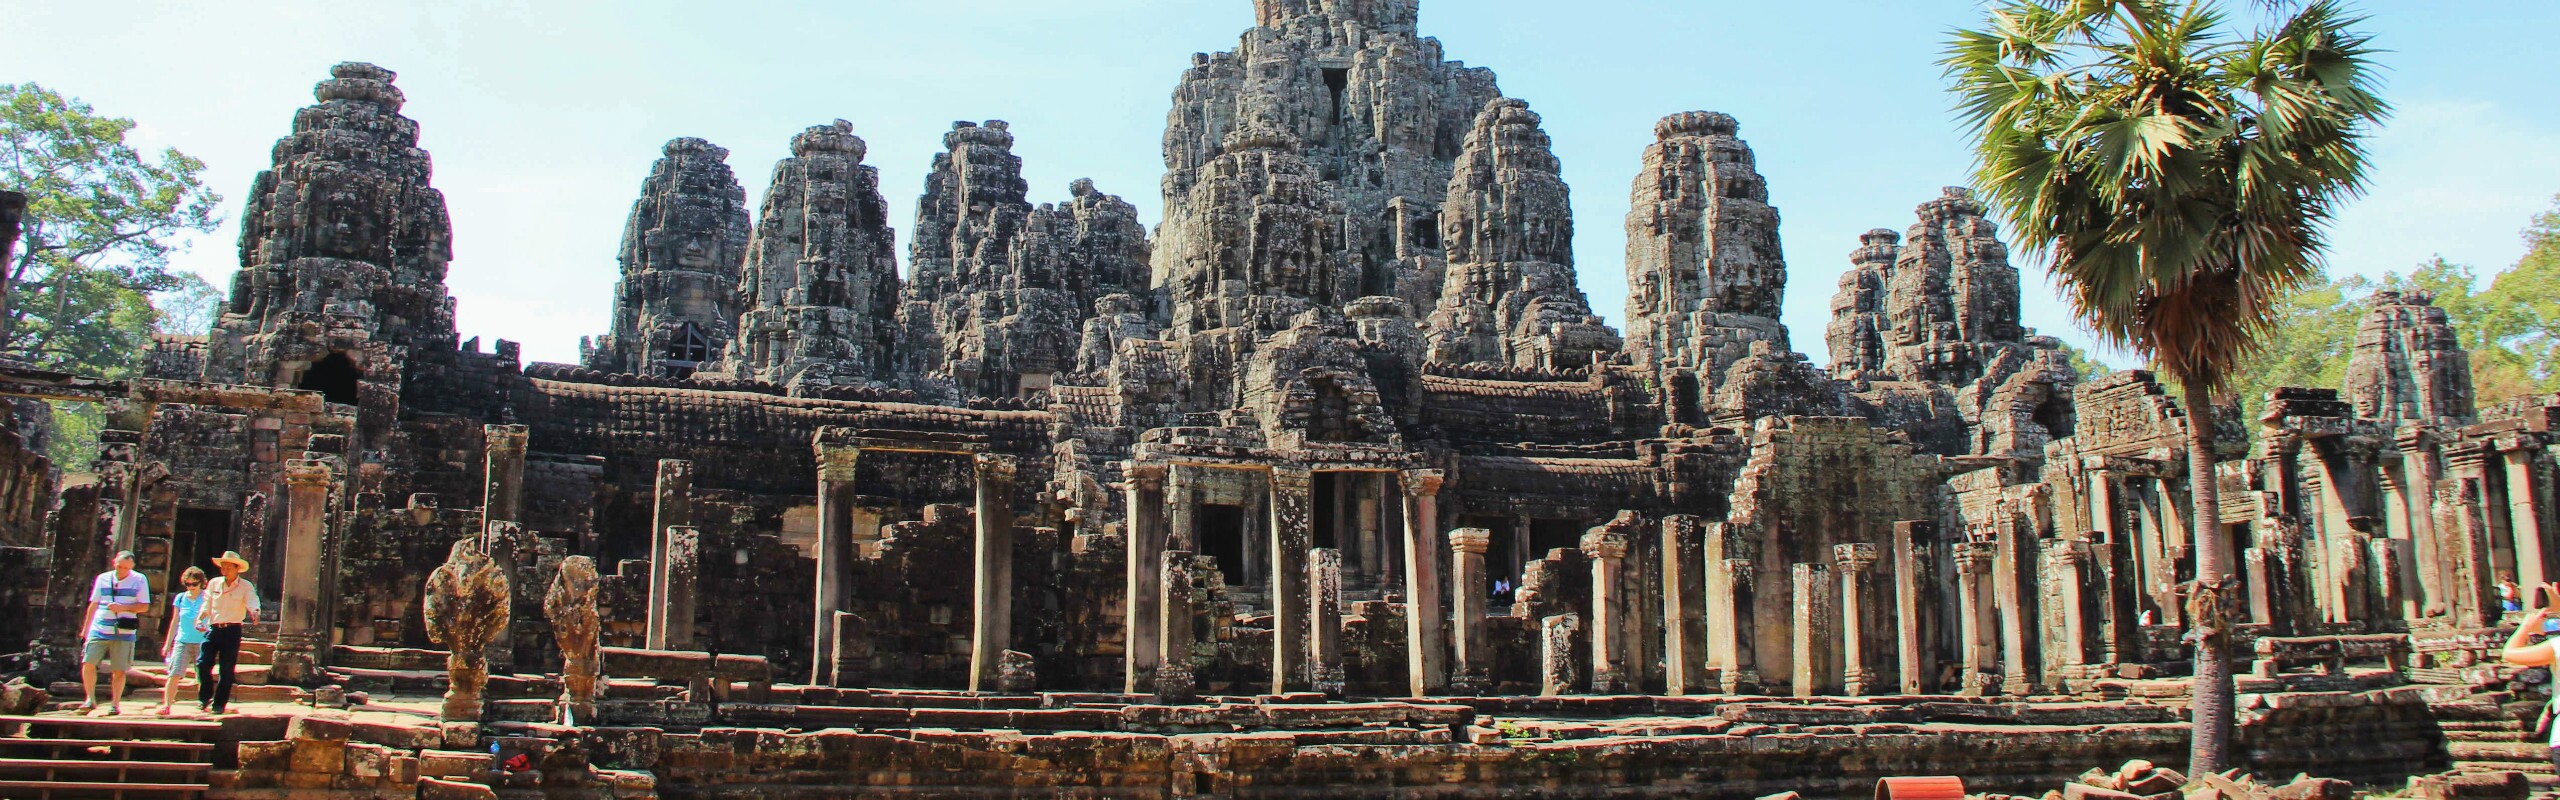 How to Plan a Trip to Angkor Wat 